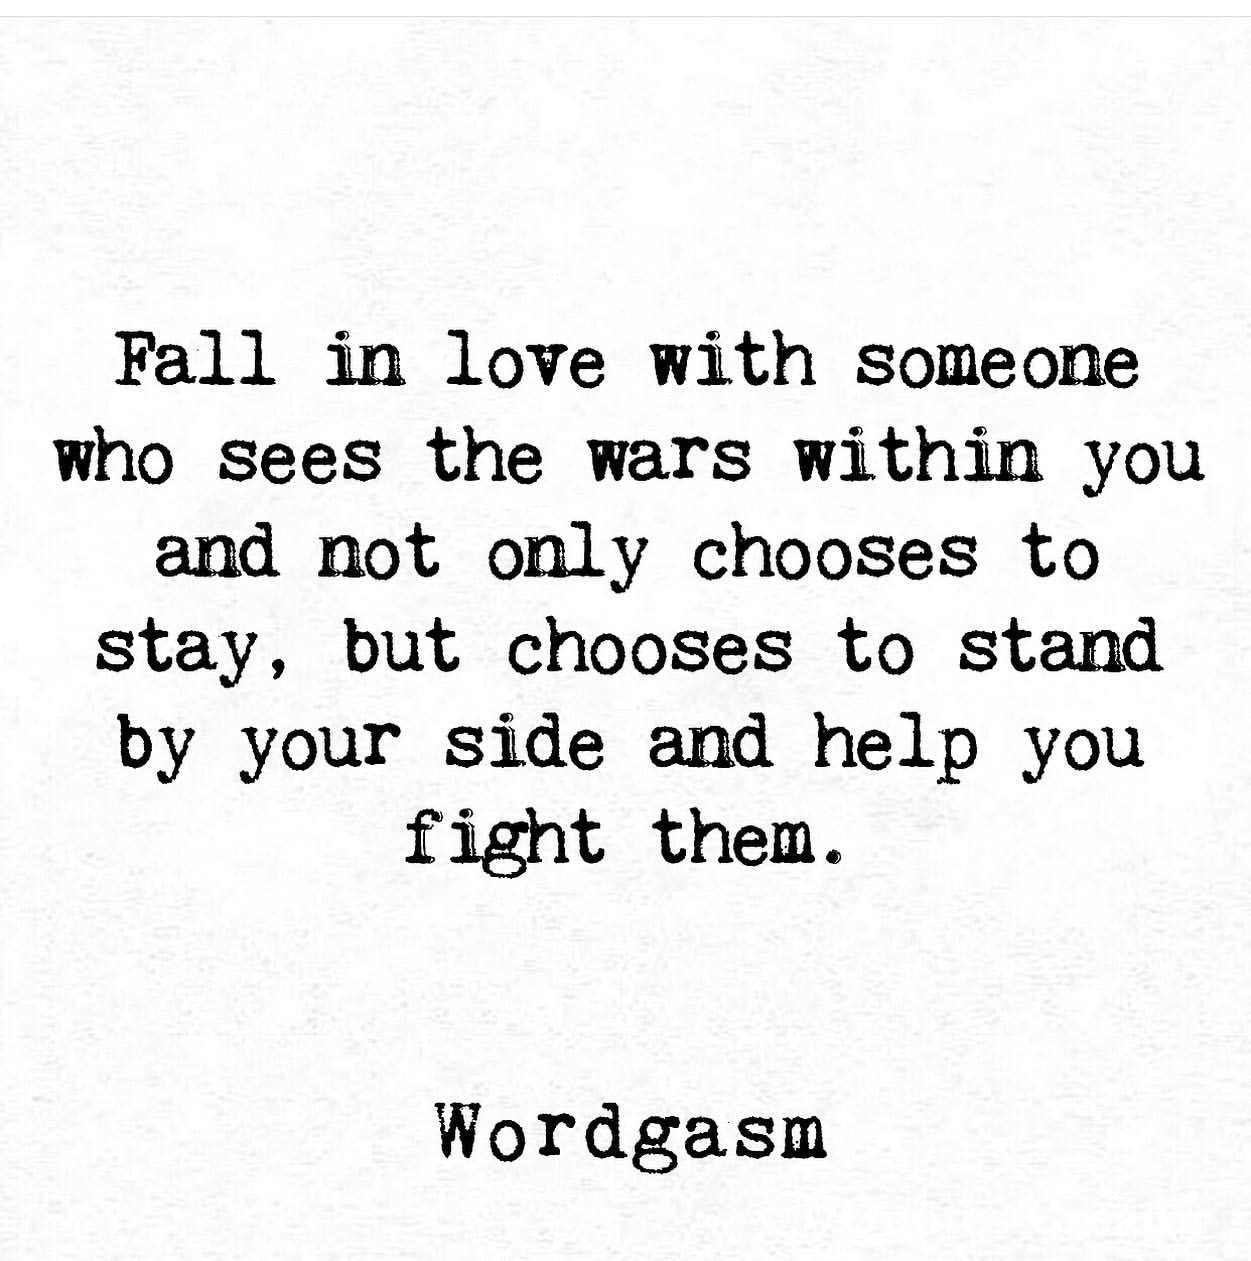 Fall in love with someone who sees the wars within you and not only chooses to stay, but chooses to stand by your side and help you fight them.